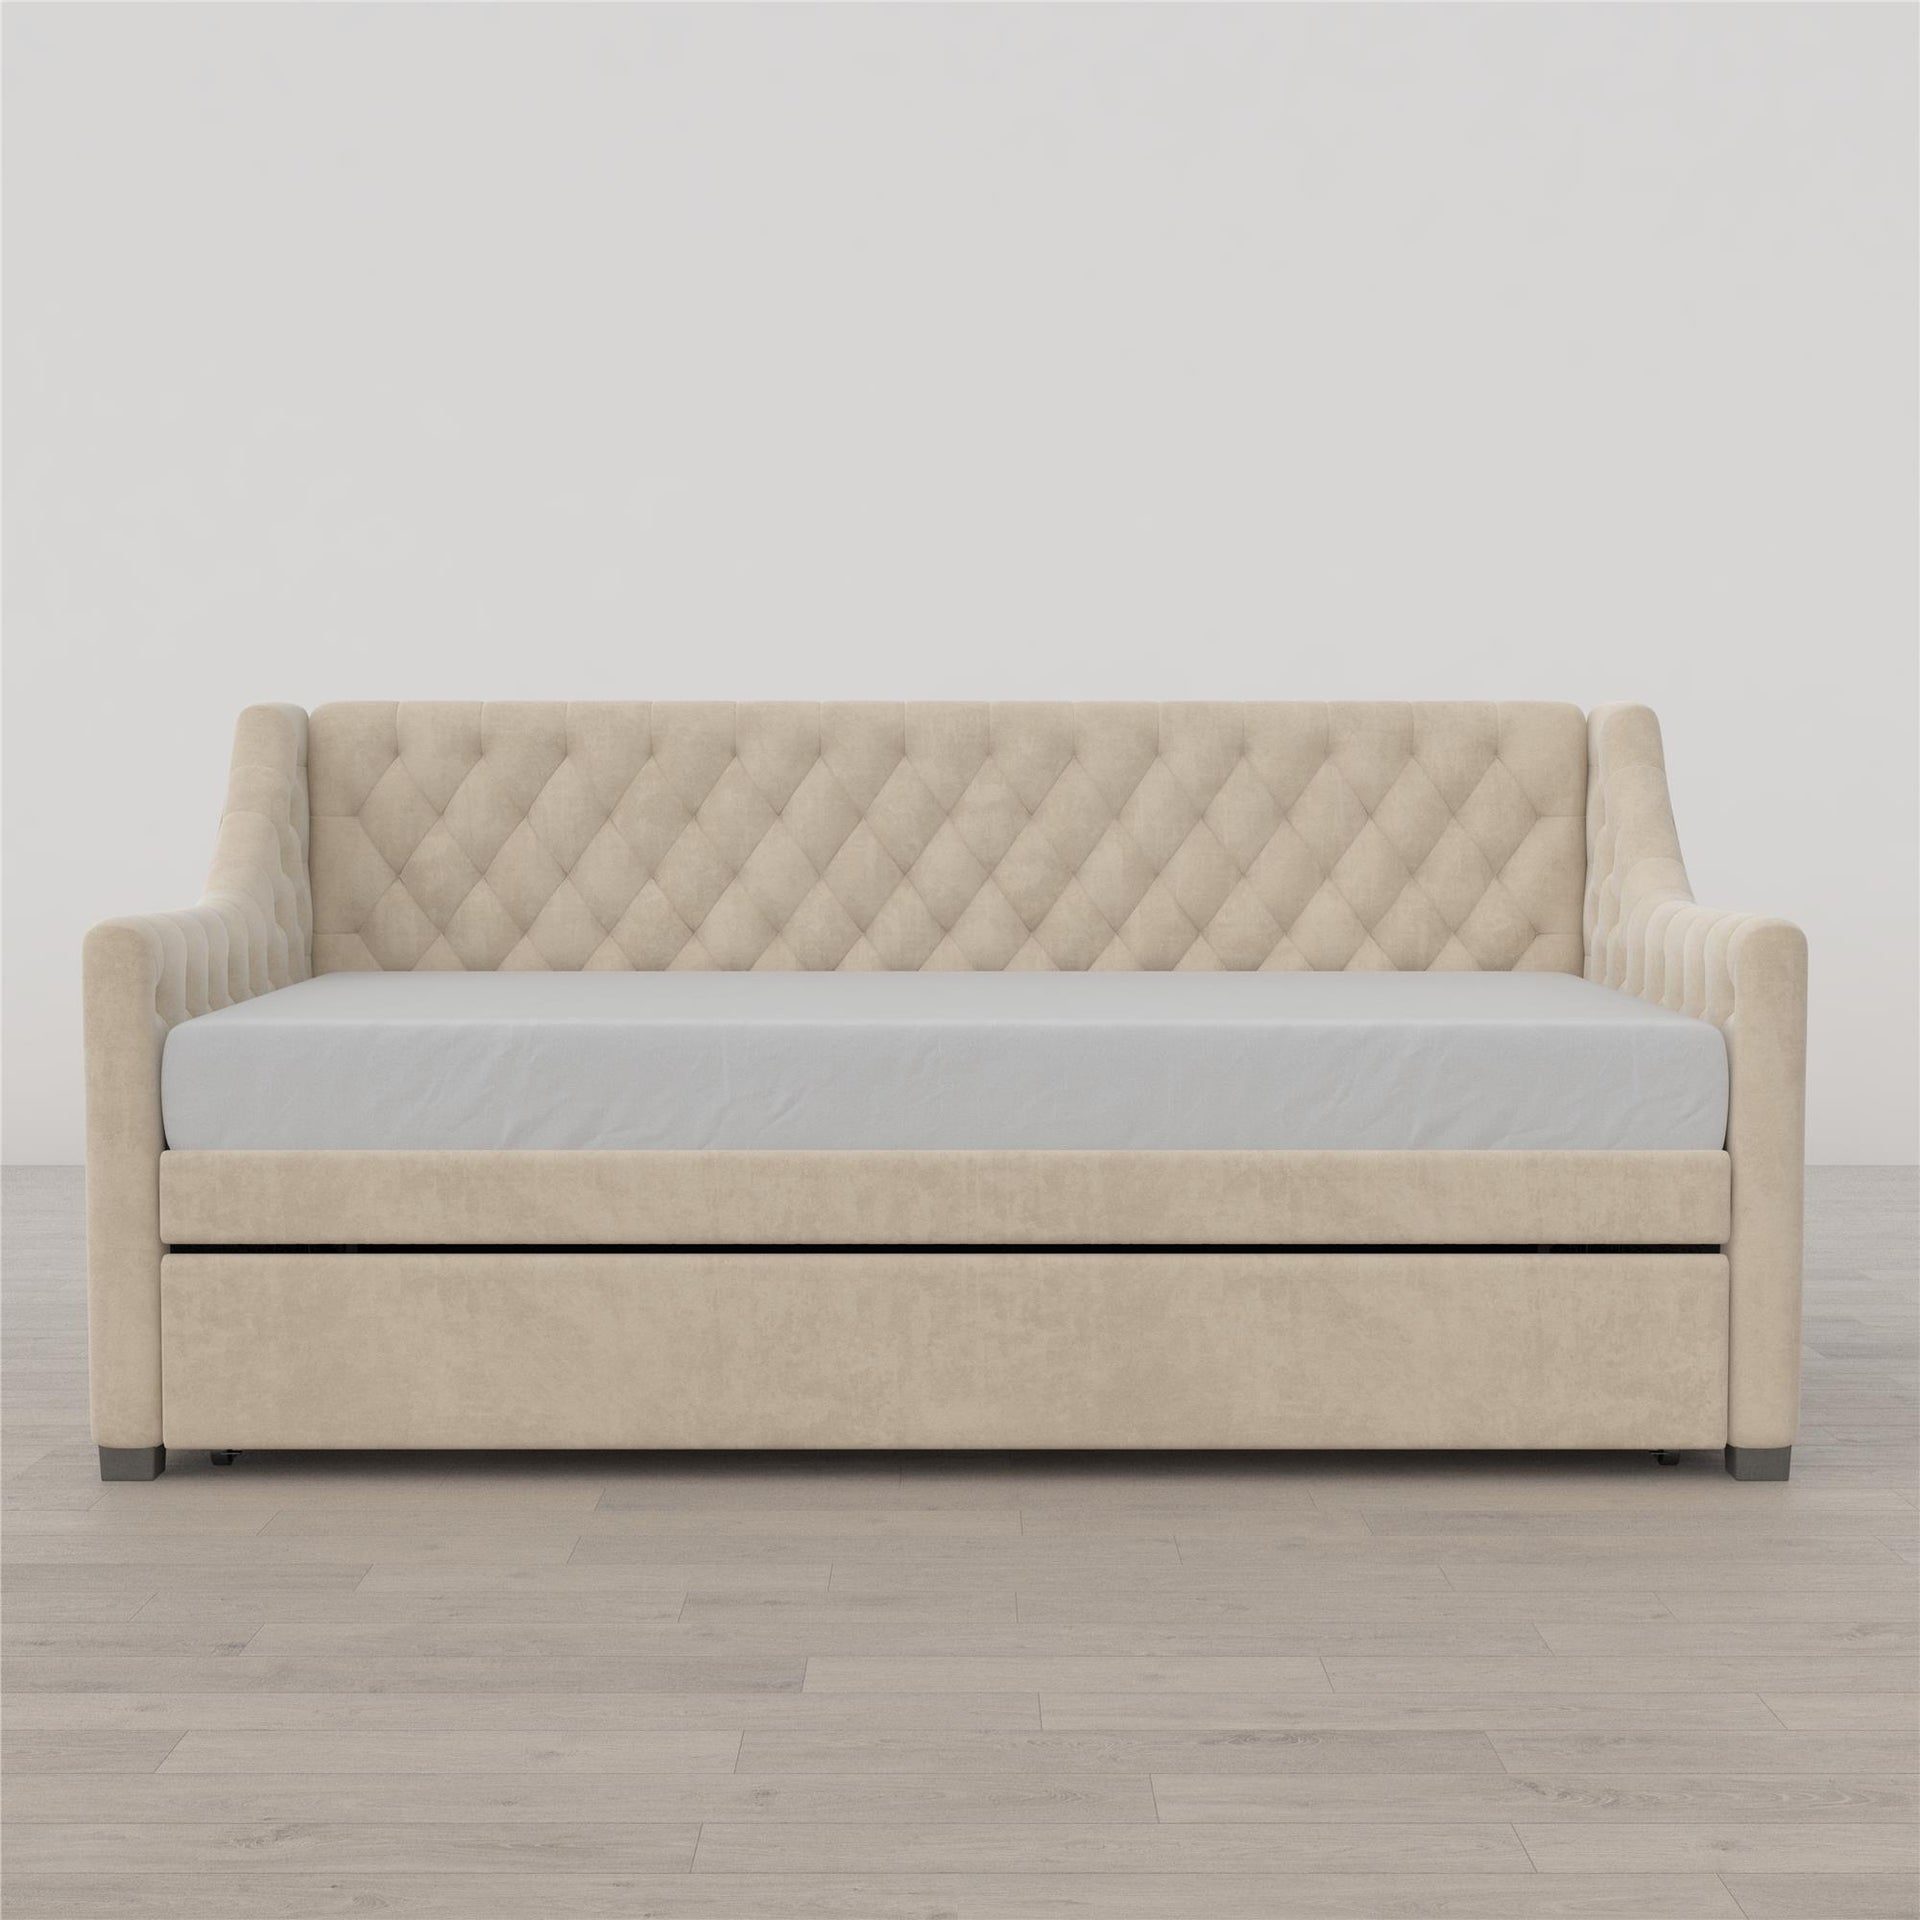 Little Seeds Monarch Hill Ambrosia Upholstered Daybed and Trundle - Ivory - Twin